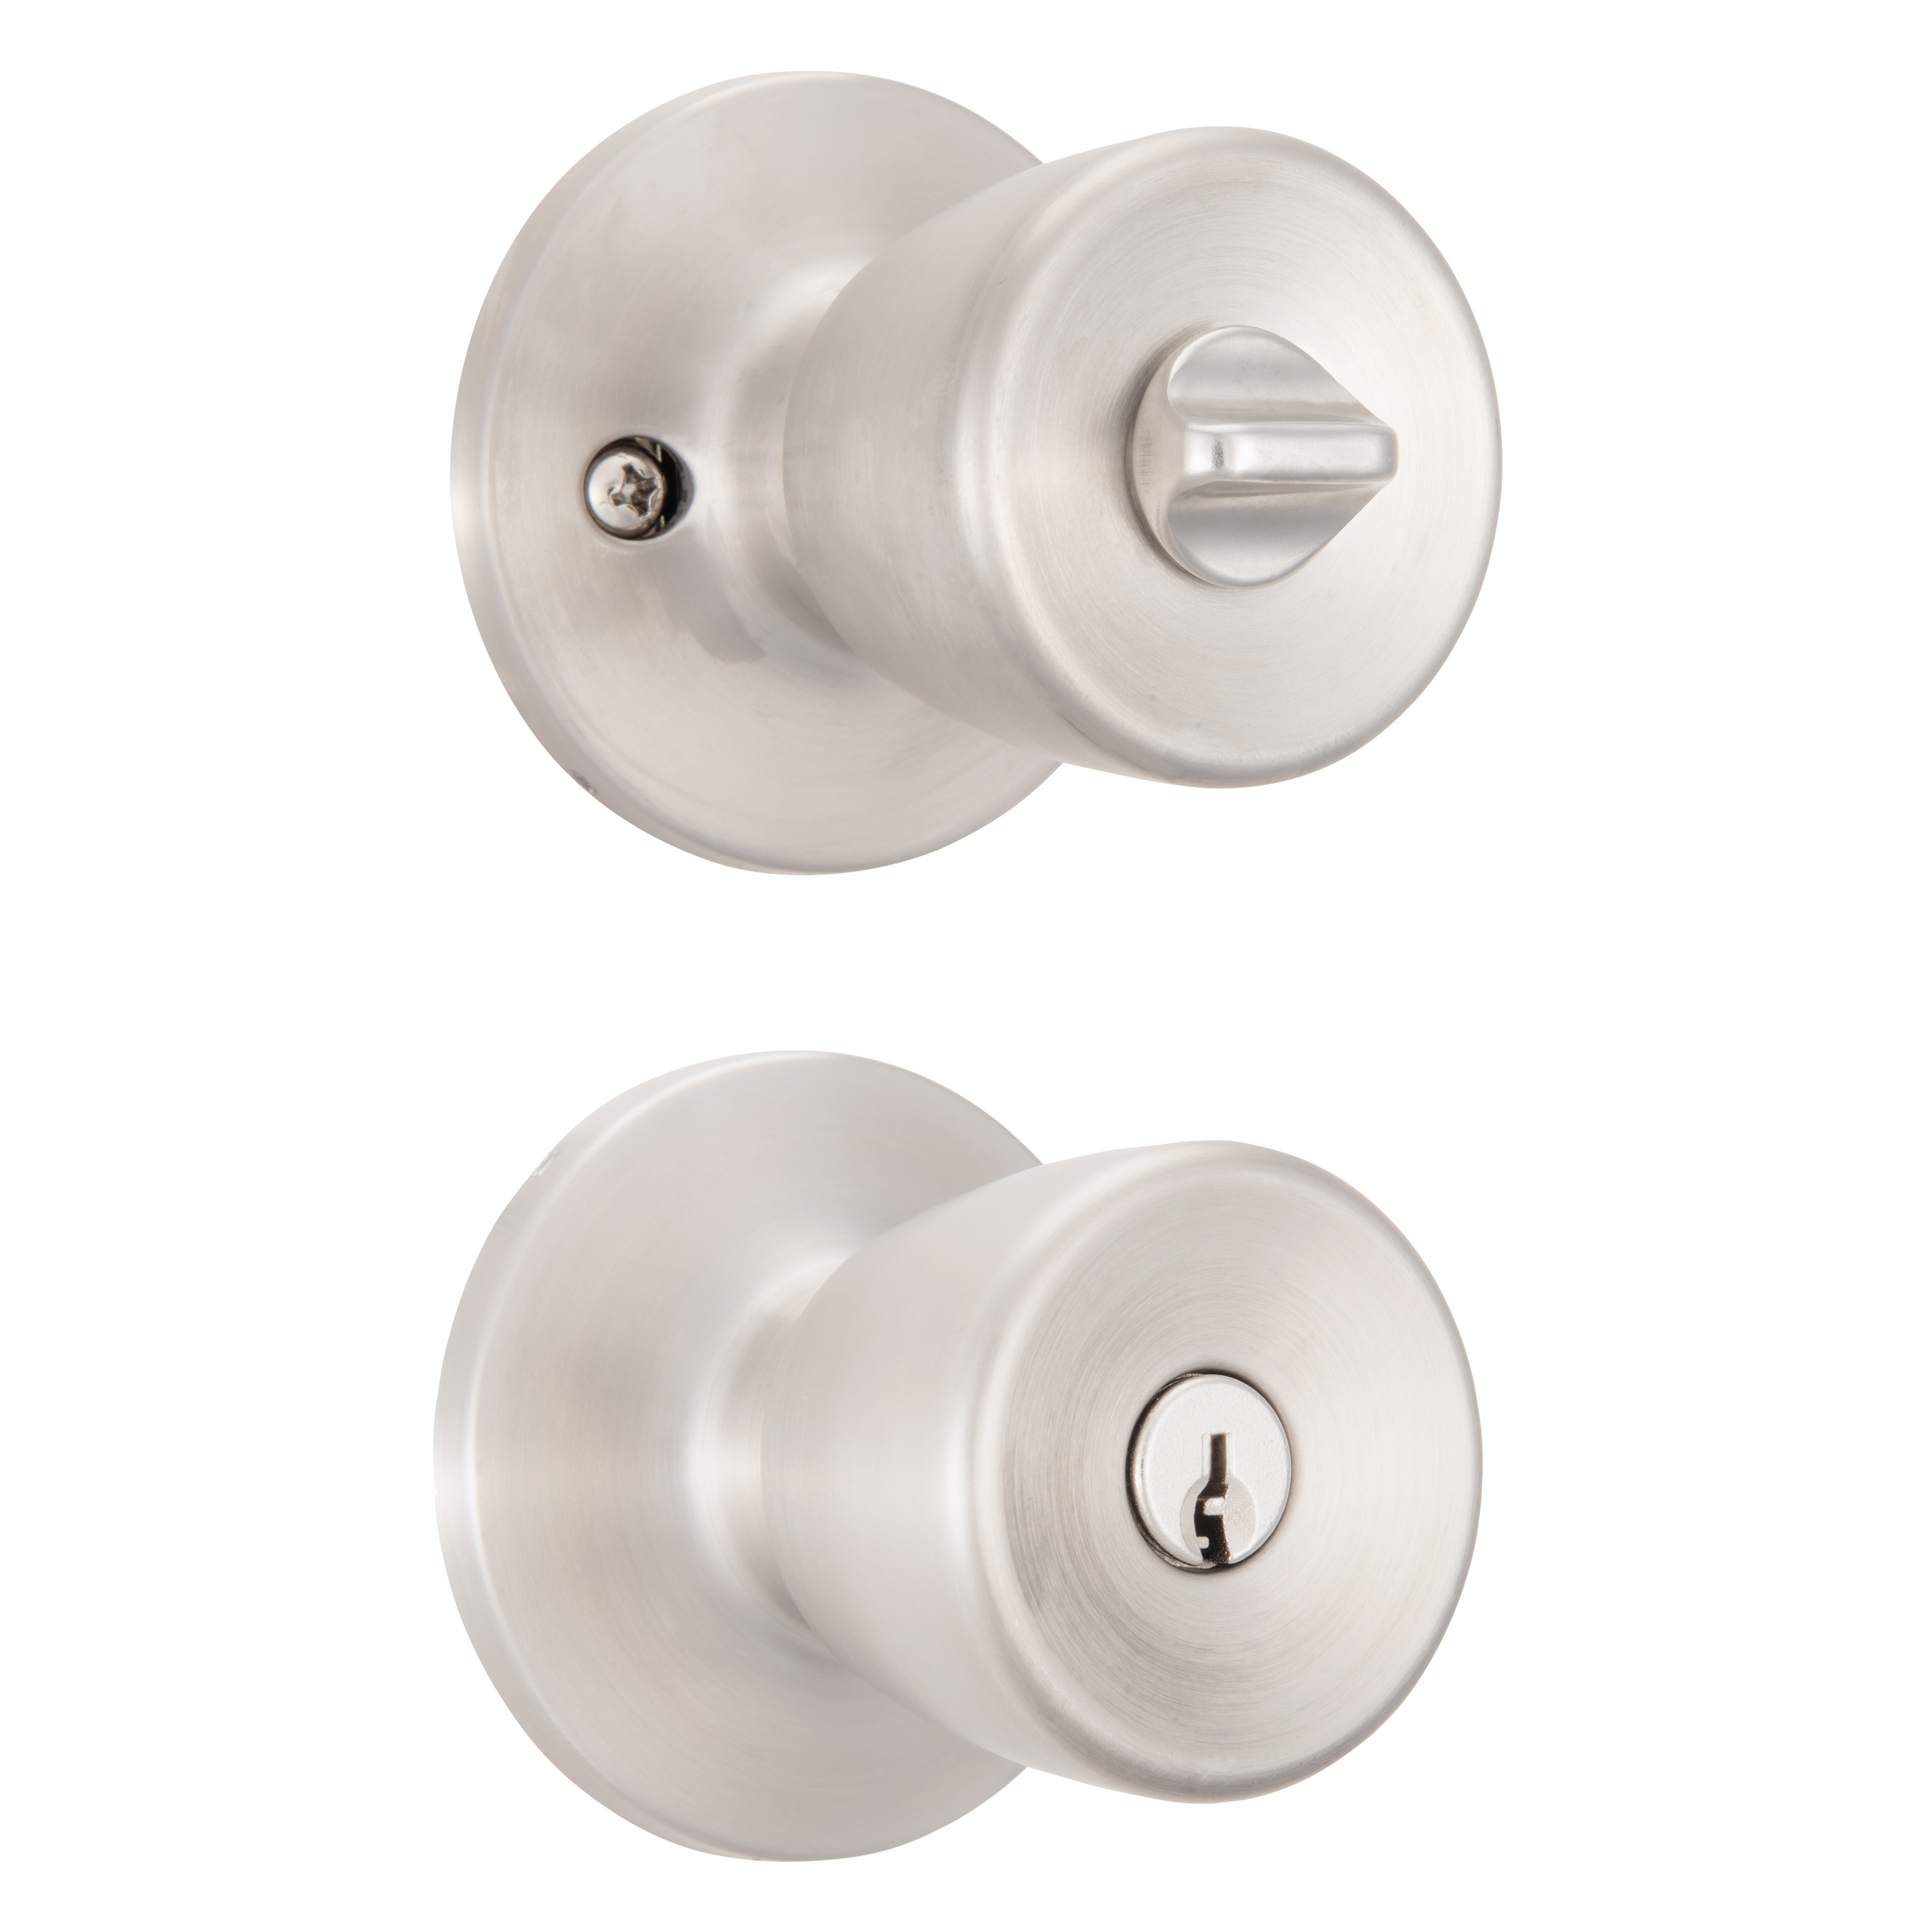 Brinks Mobile Home Keyed Entry Bell Style Doorknob, Stainless Steel Finish - image 4 of 10